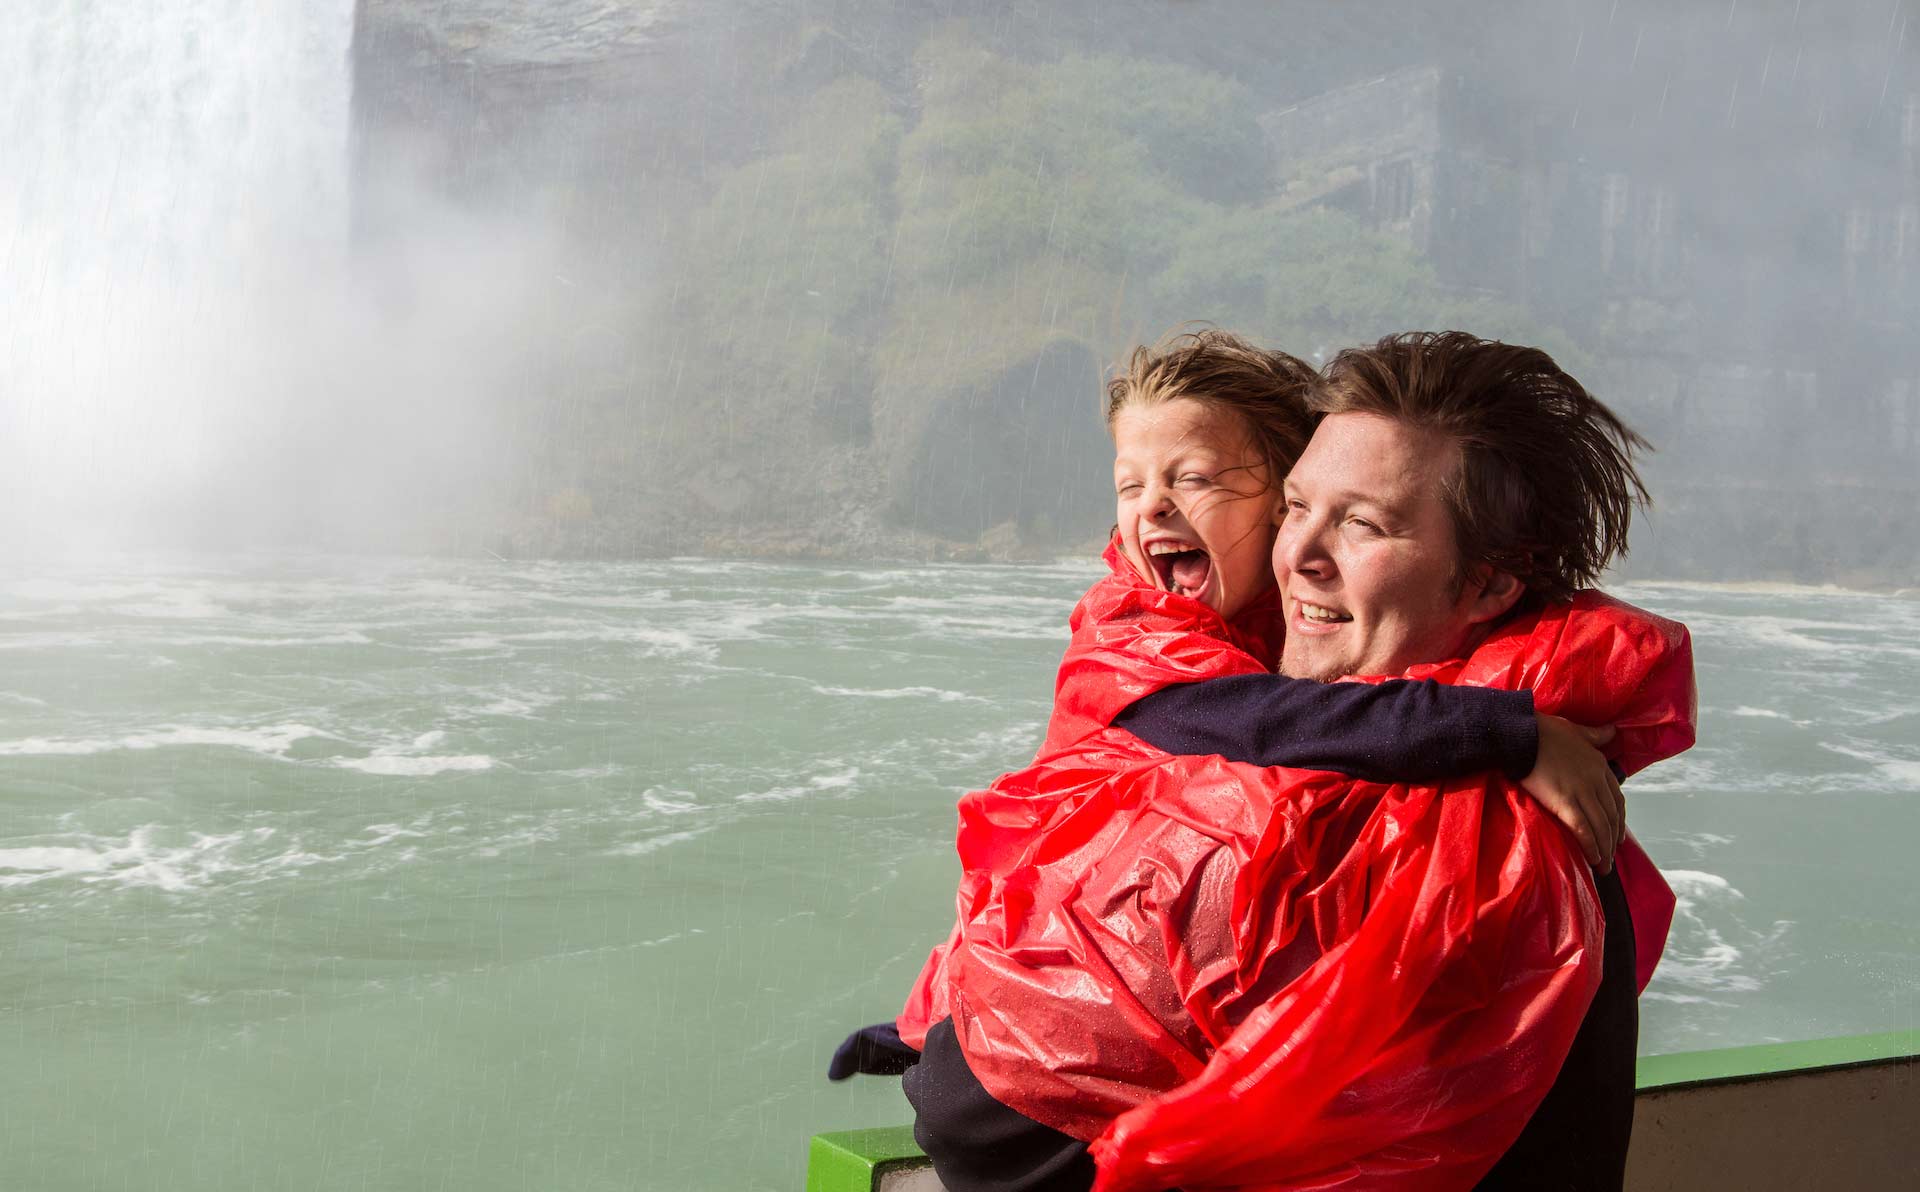 Adult holding a child on boat at base of Niagara Falls getting wet wearing ponchos.